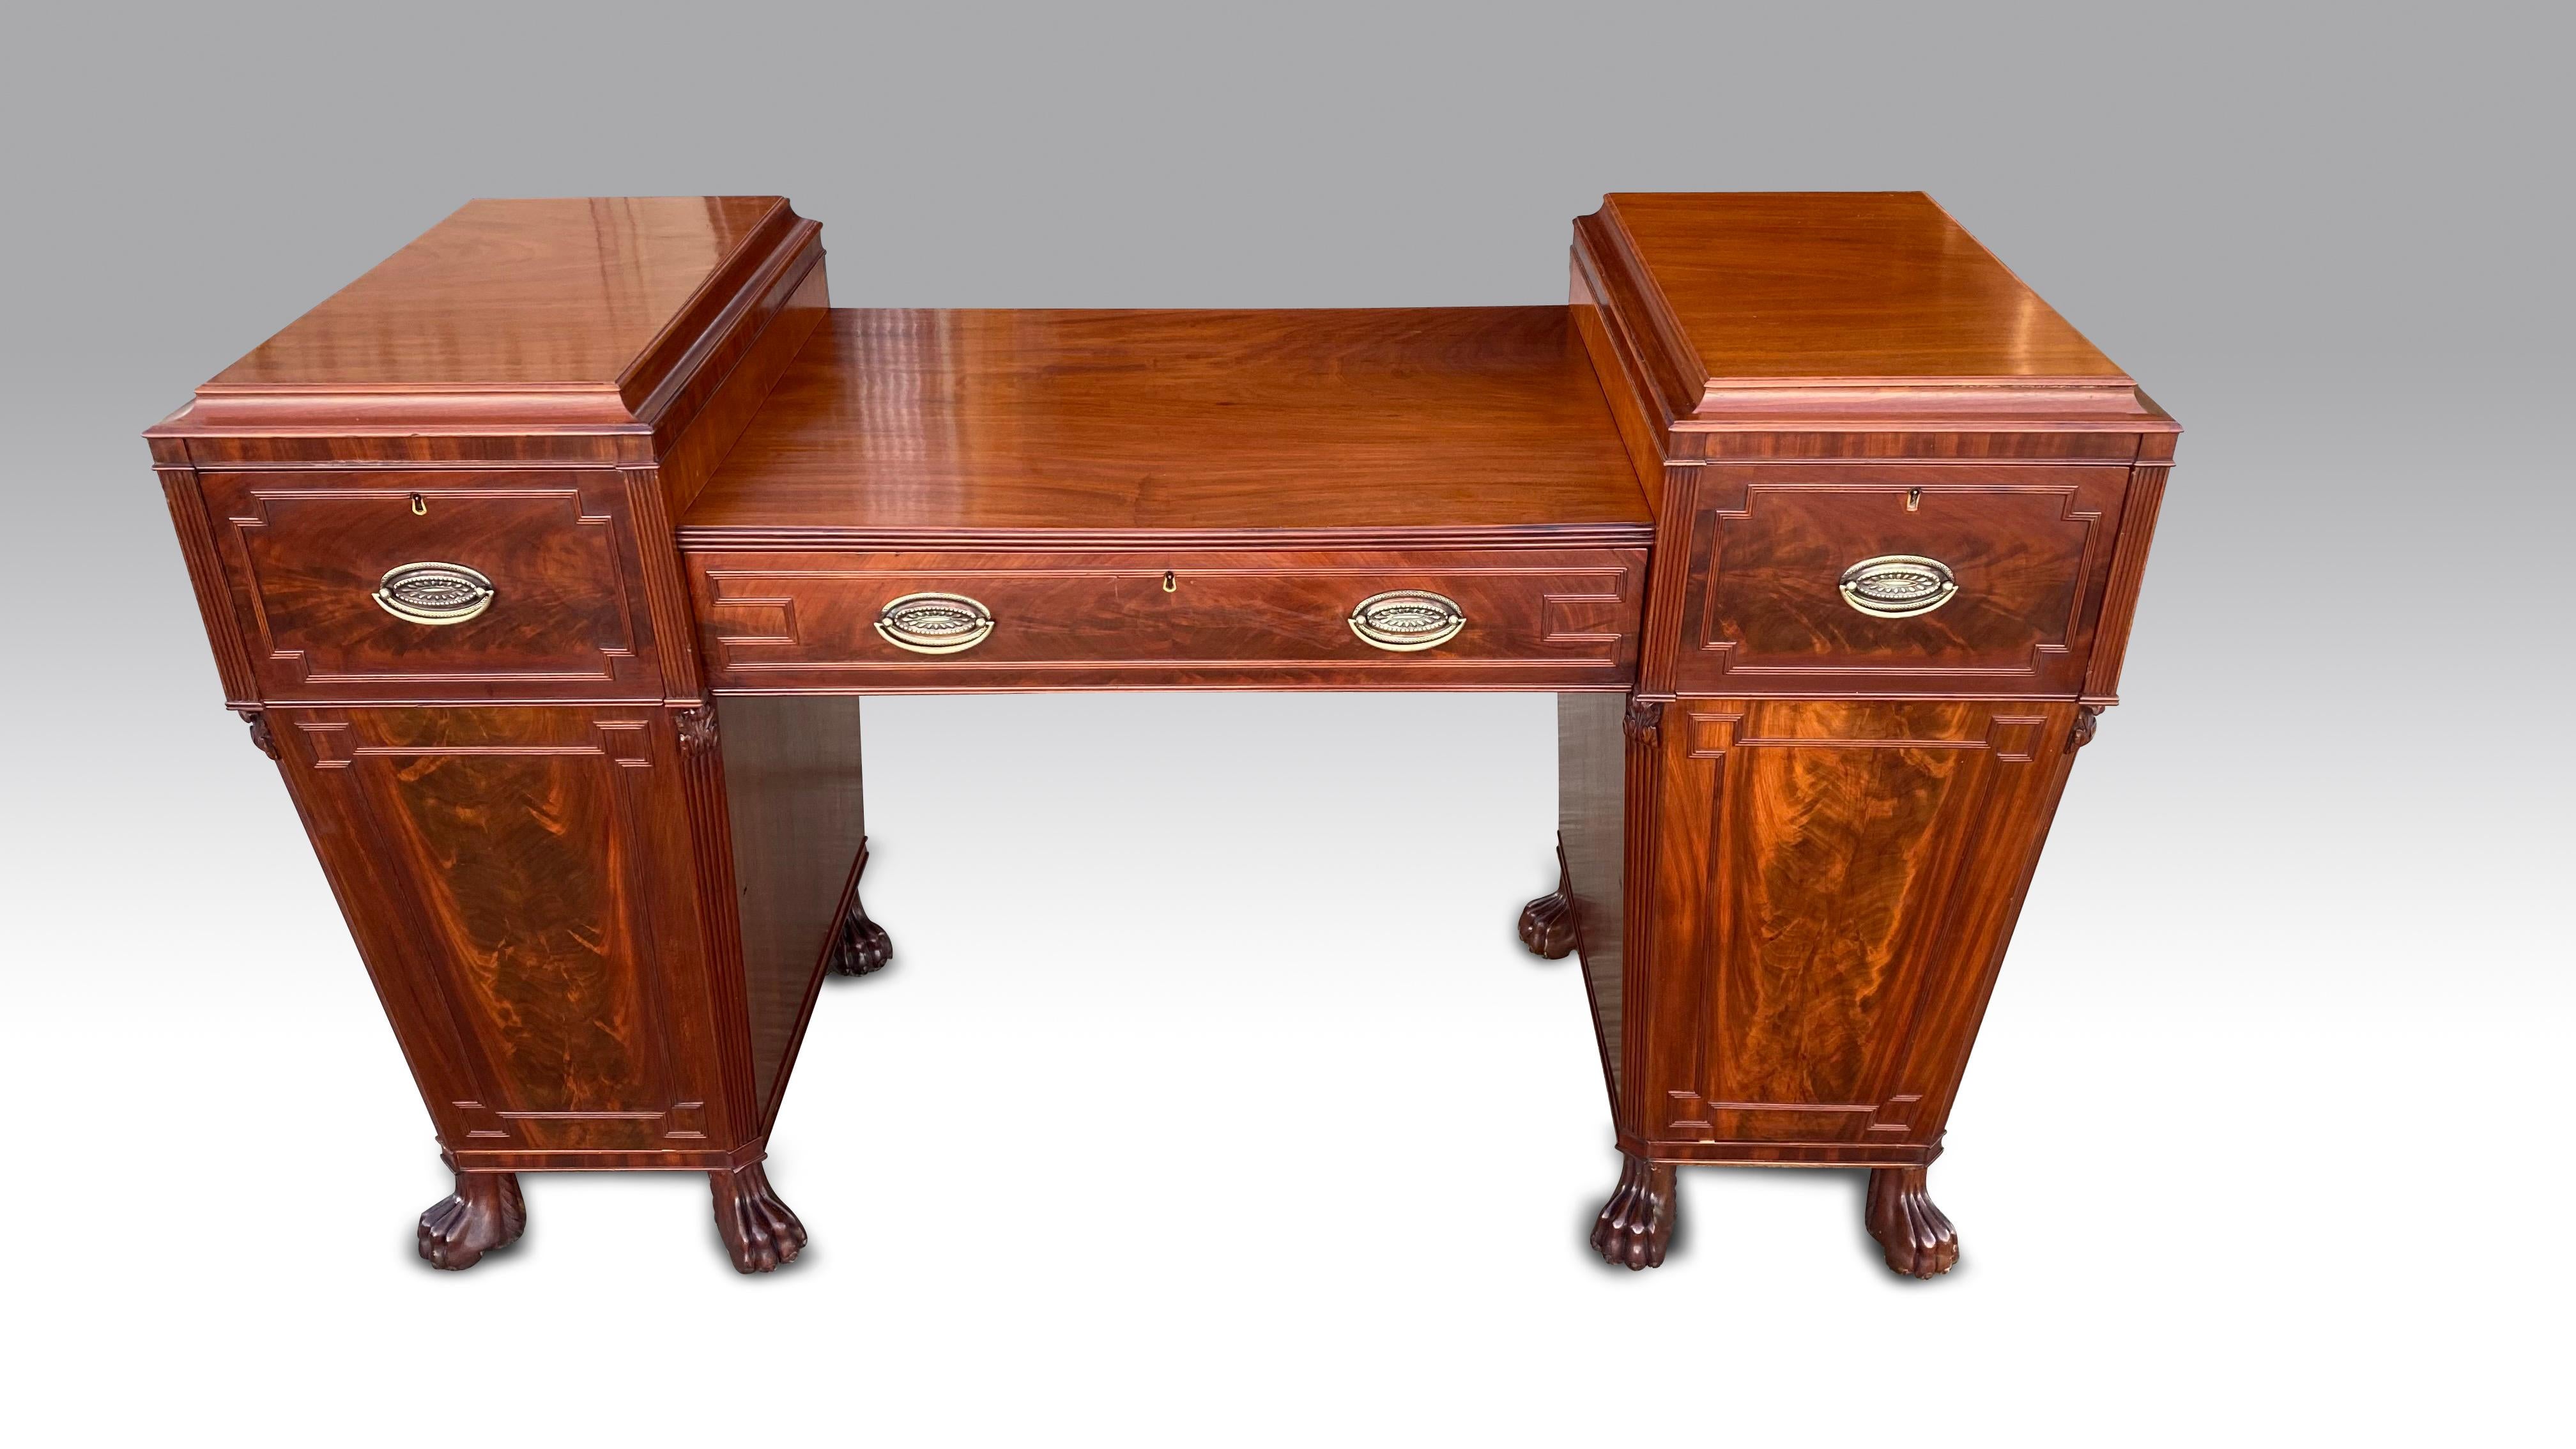 A good Regency period mahogany twin pedestal sideboard of Grecian influence.
The twin pedestals tapering downwards supported on carved lion paw feet.
The pedestals with beaded canted corners & carved capitals.
Both the doors & drawers with